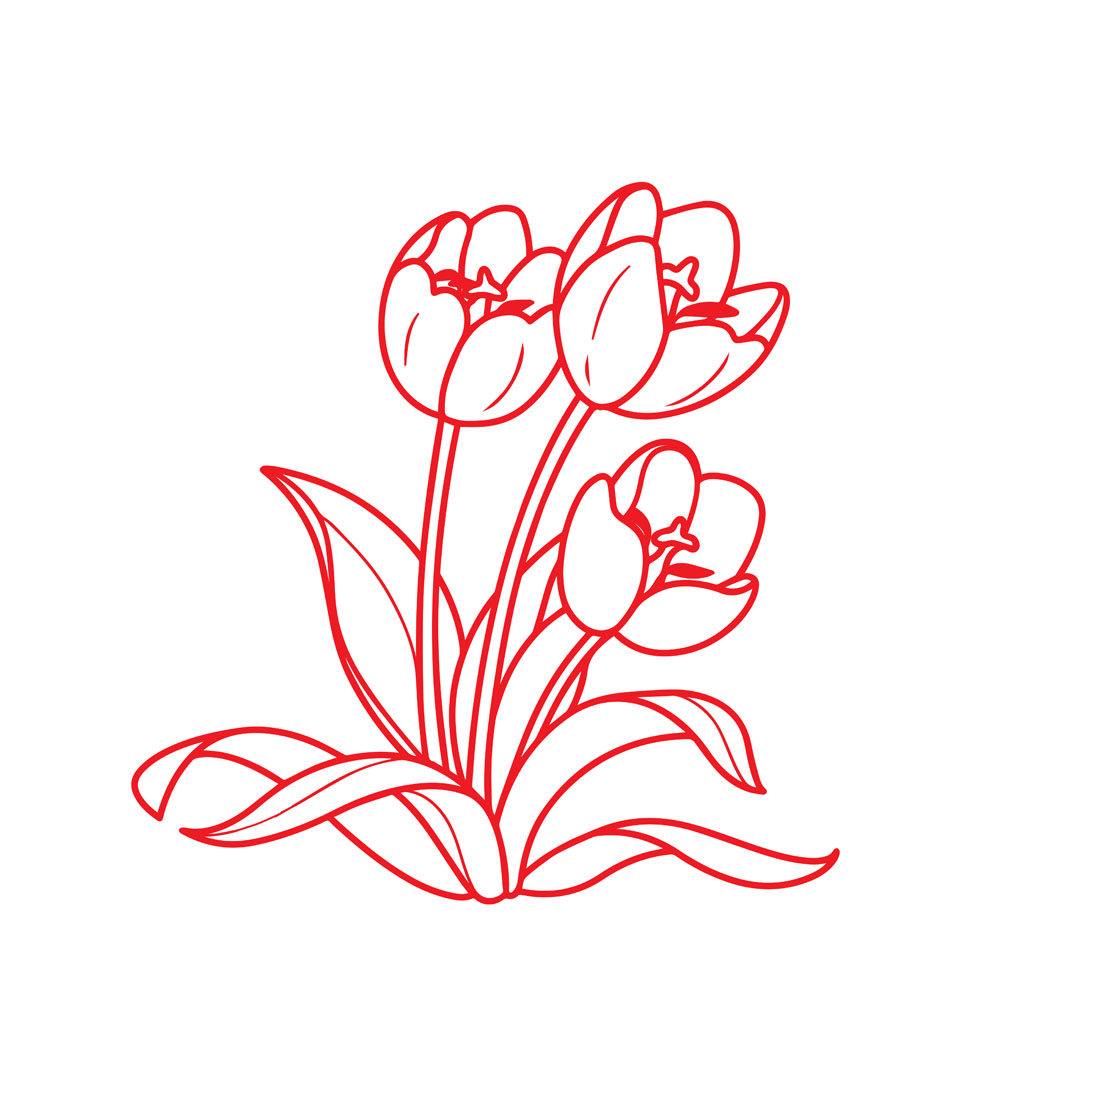 4 flower line drawings in red color suitable for drawing books, tattoos etc preview image.